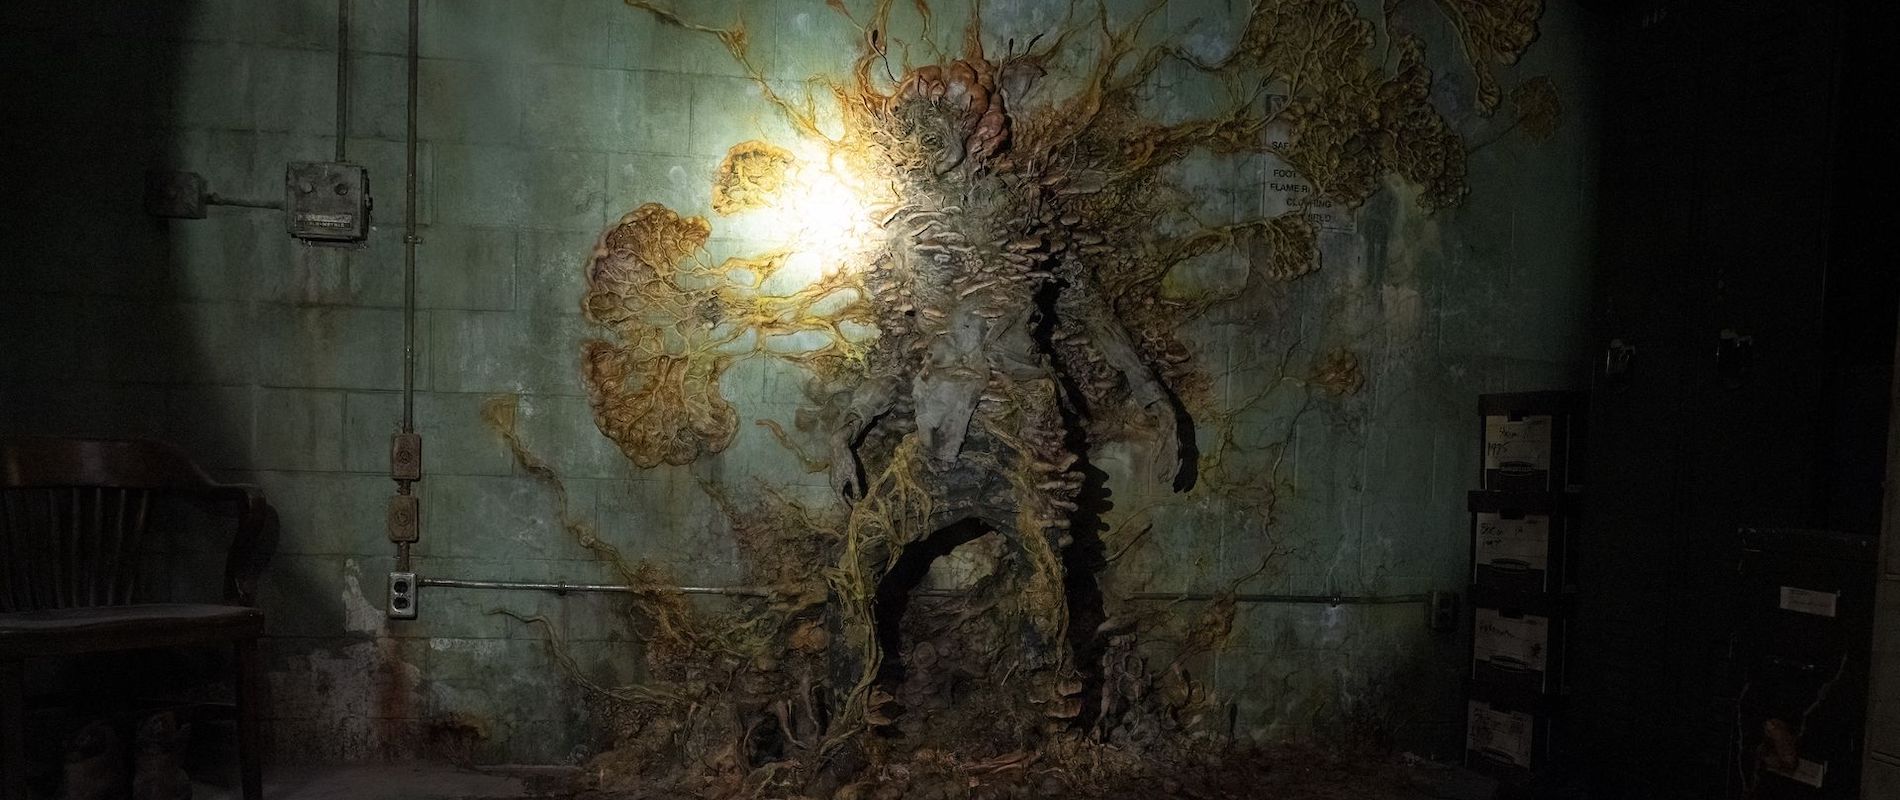 Cordyceps infected zombie from The Last Of Us with fungal outgrowths growing against a way